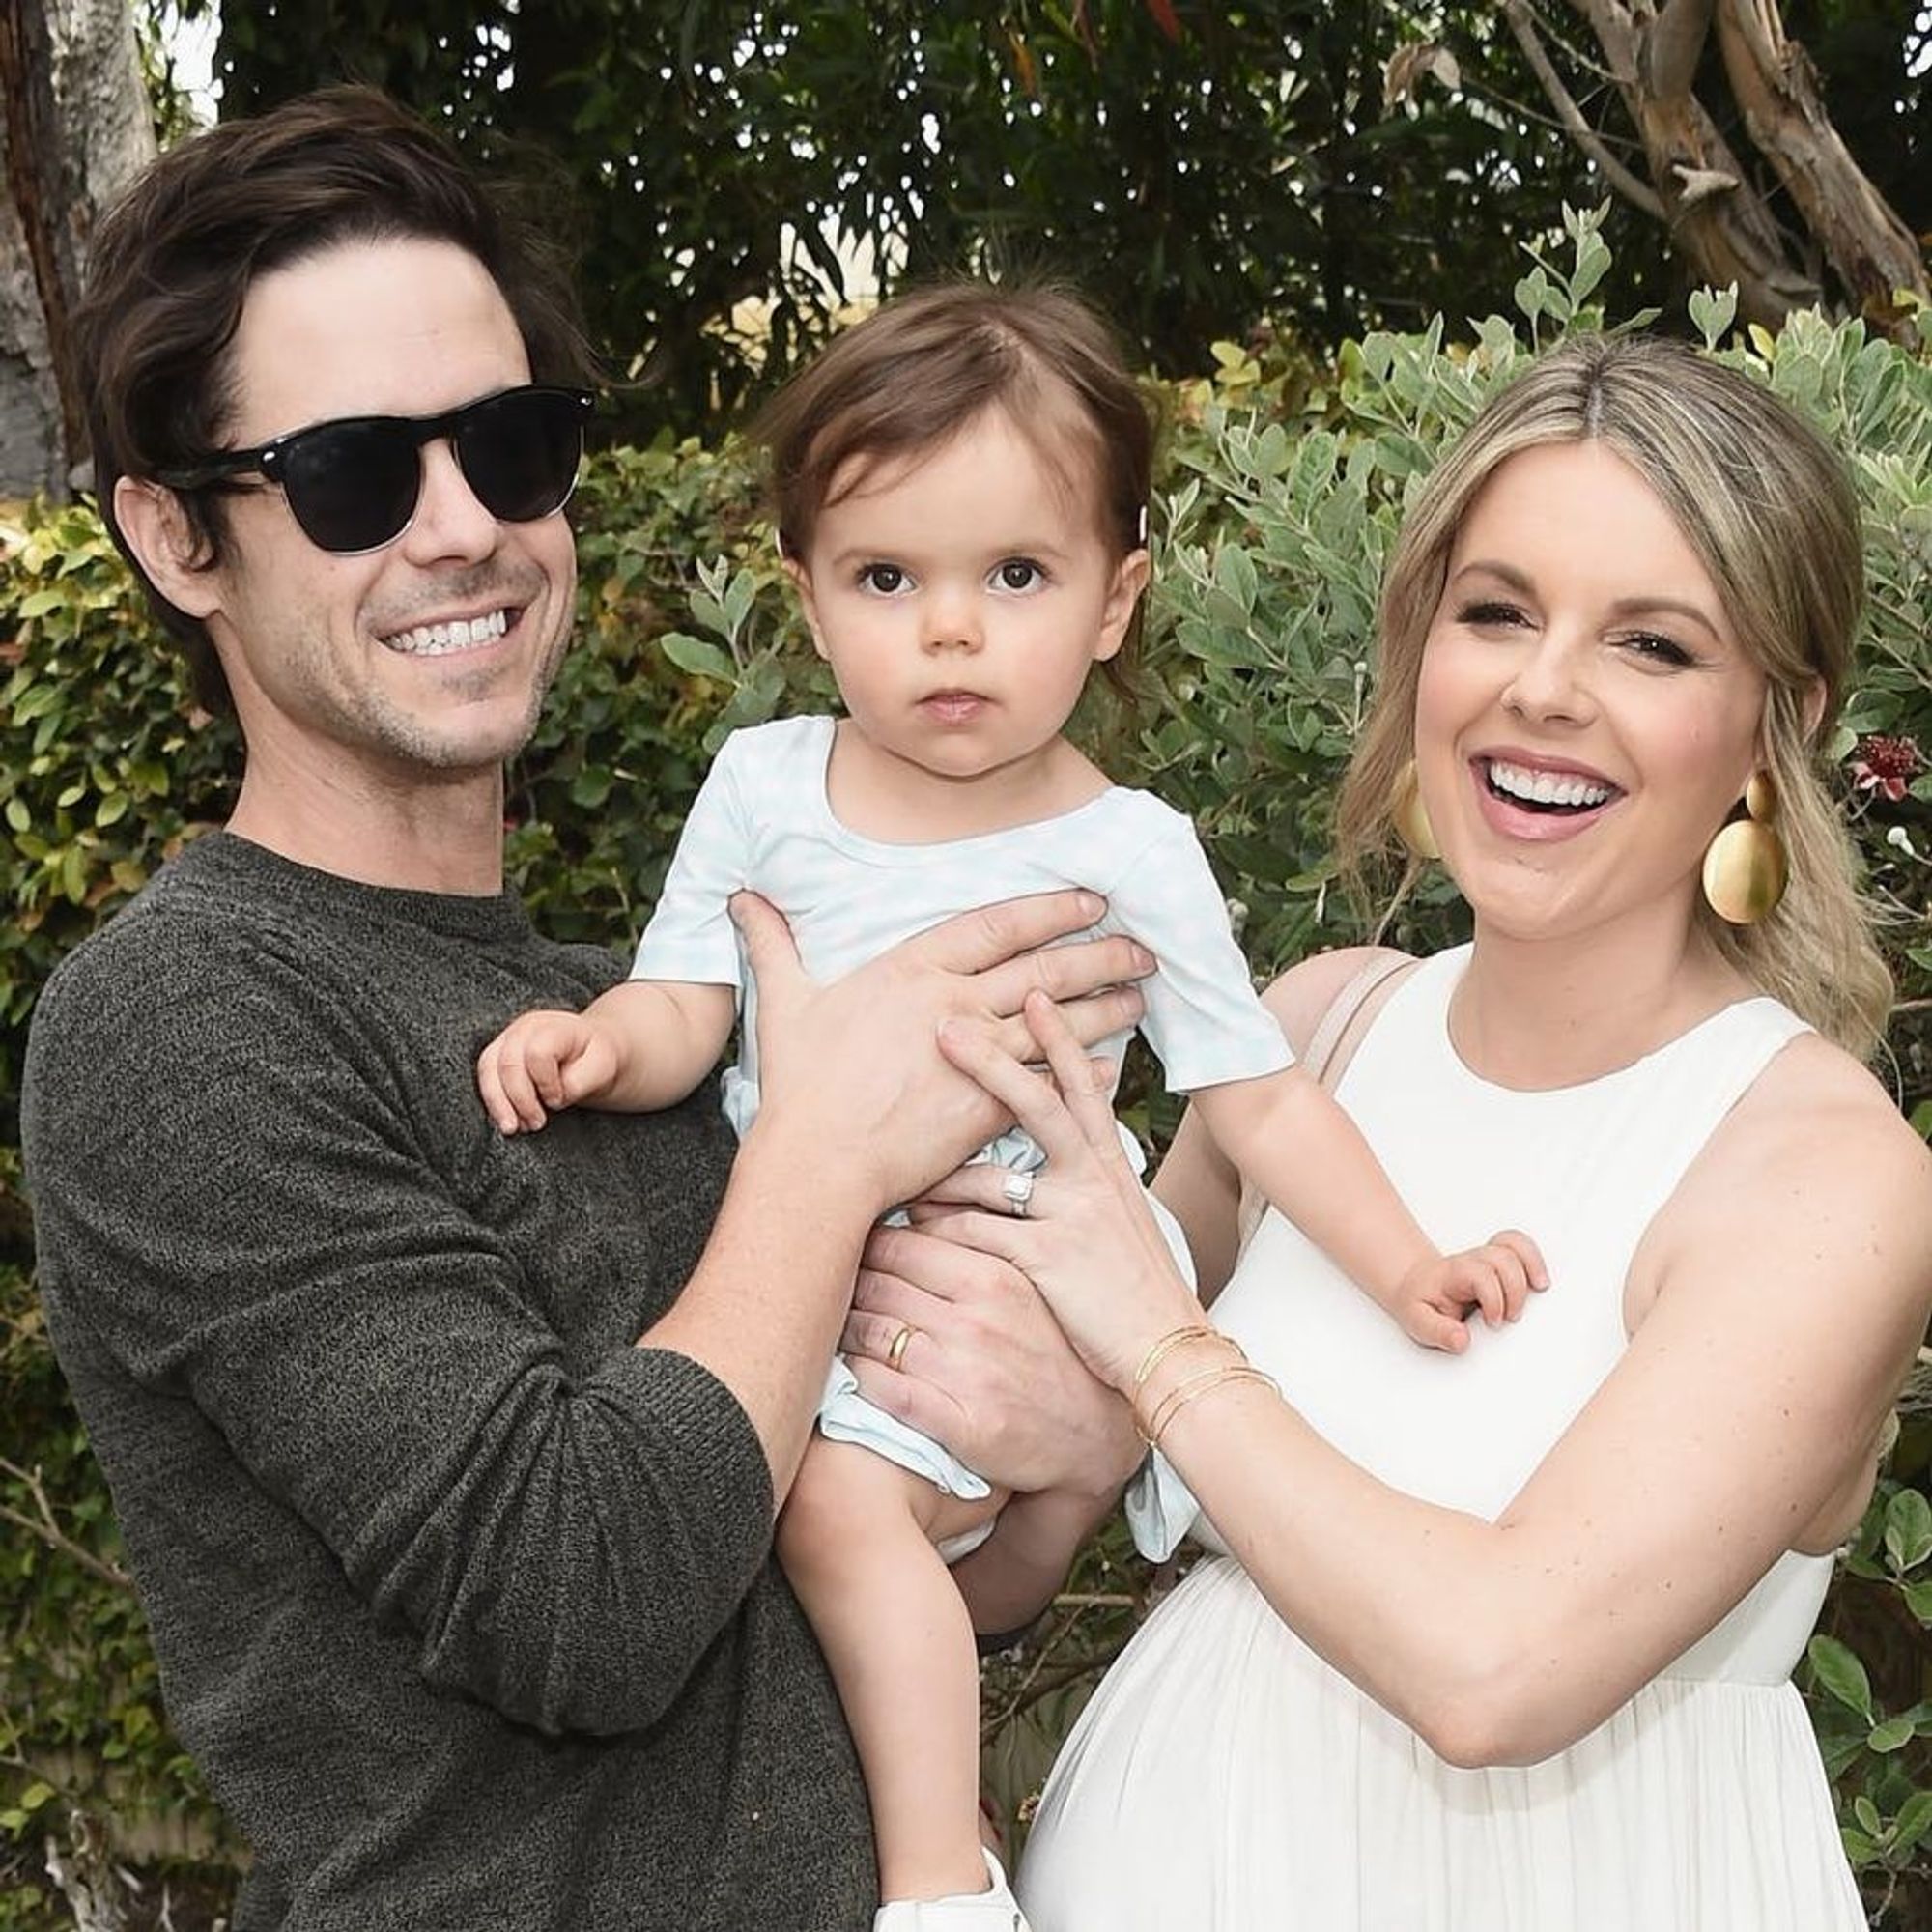 ali-fedotowsky-manno-welcomes-a-baby-boy-with-husband-kevin-manno